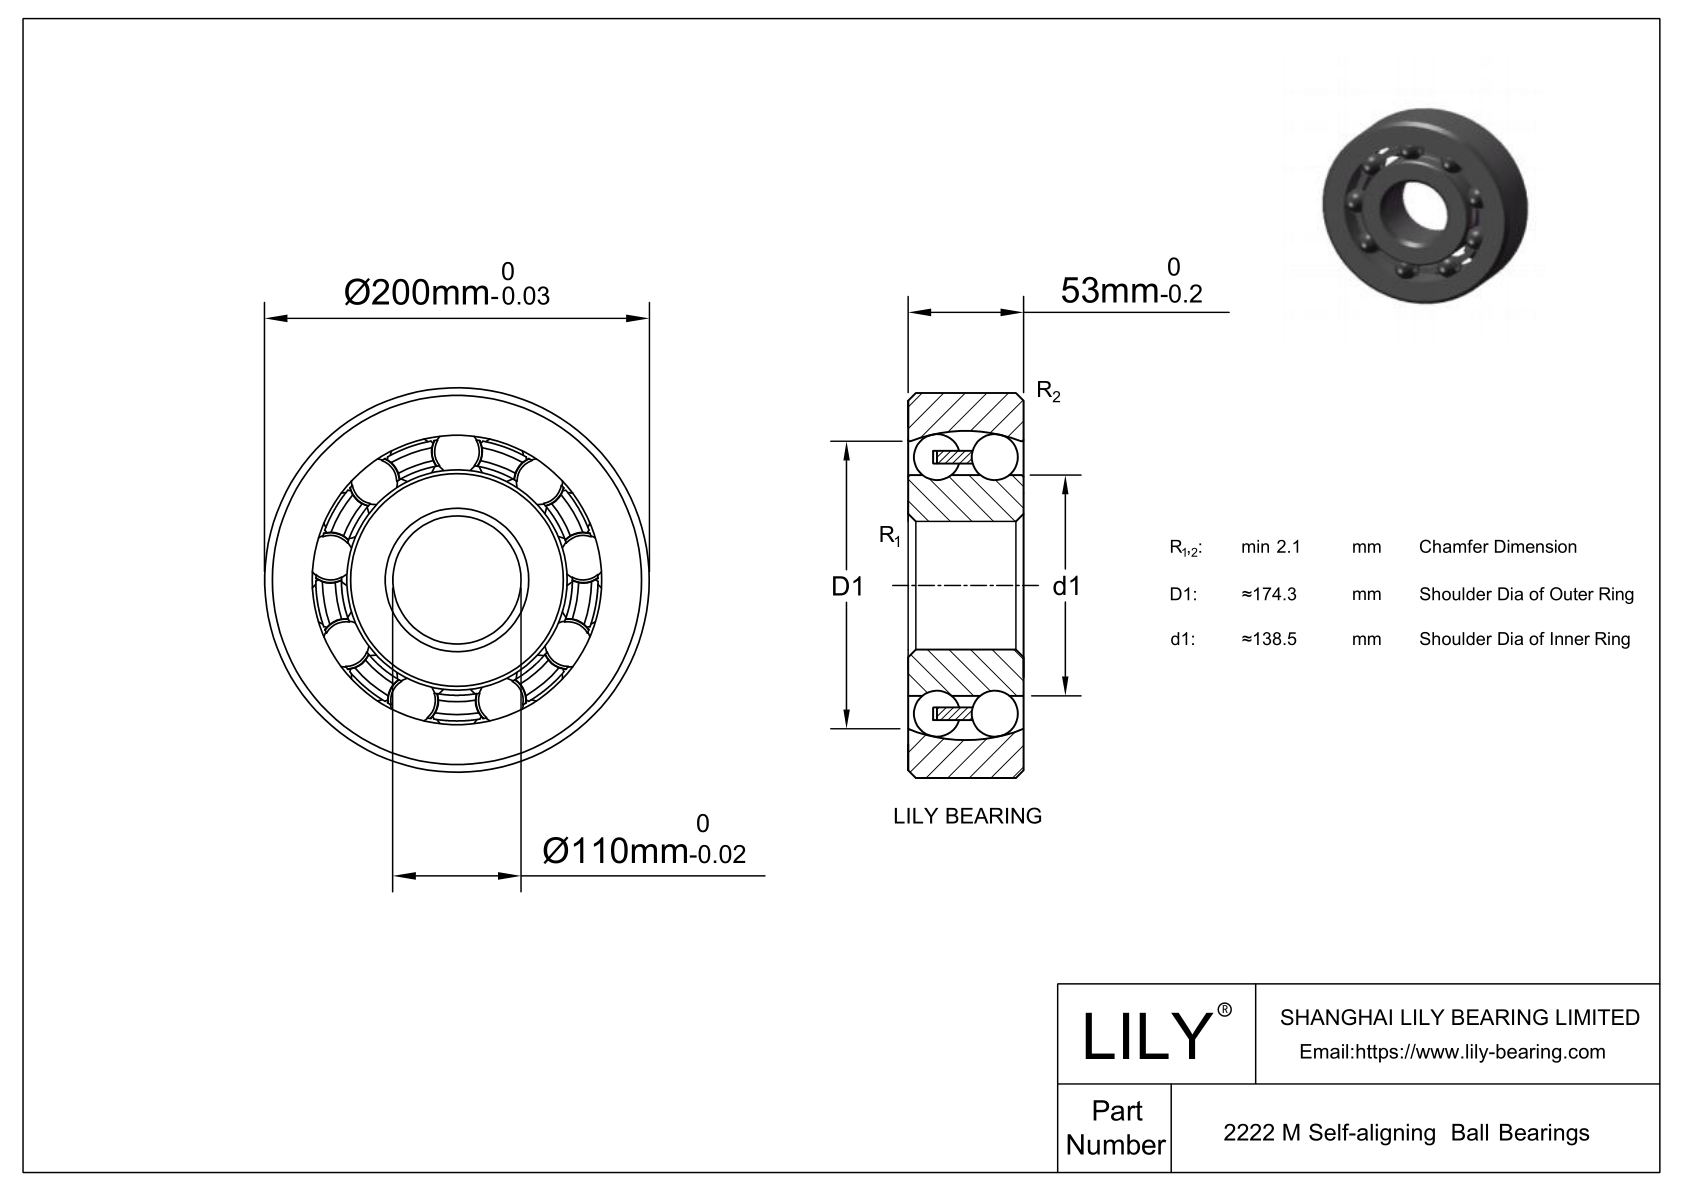 S2222 M Stainless Steel Self Aligning Ball Bearings cad drawing